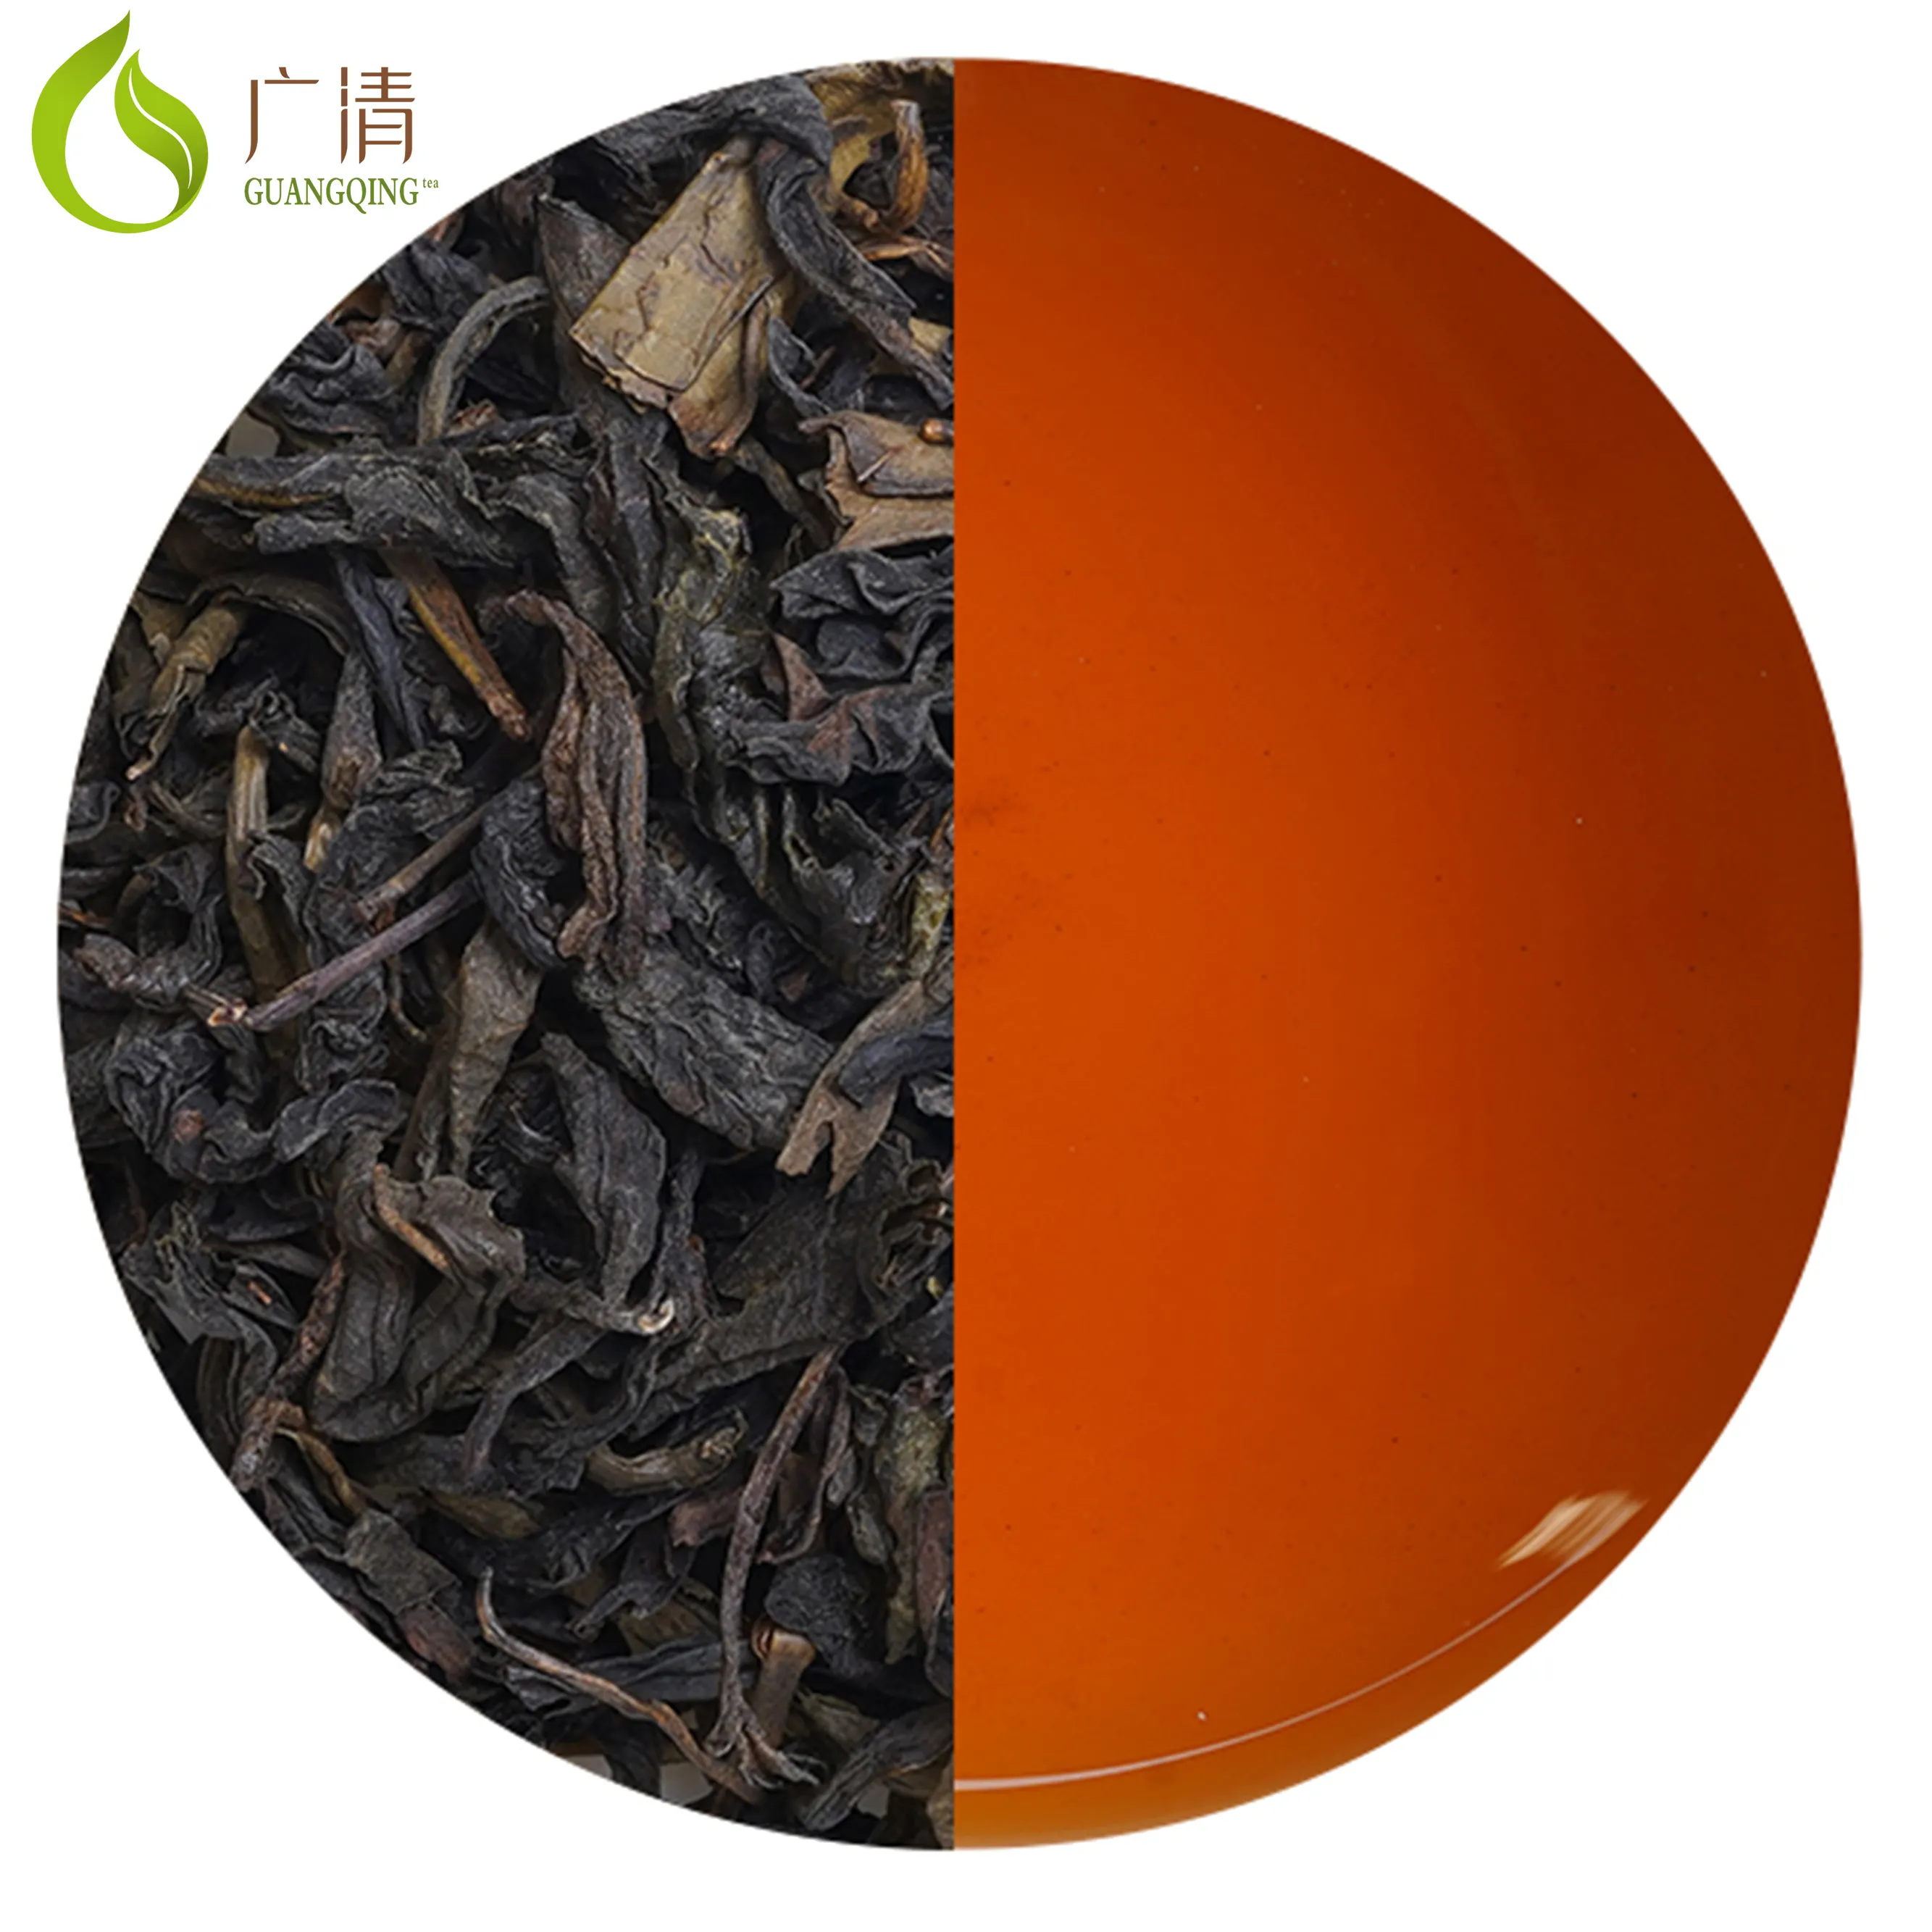 GUANGQING The popular Da Hong Pao oolong tea is a good ingredients for milk tea and ice lemon tea from High Mountain garden